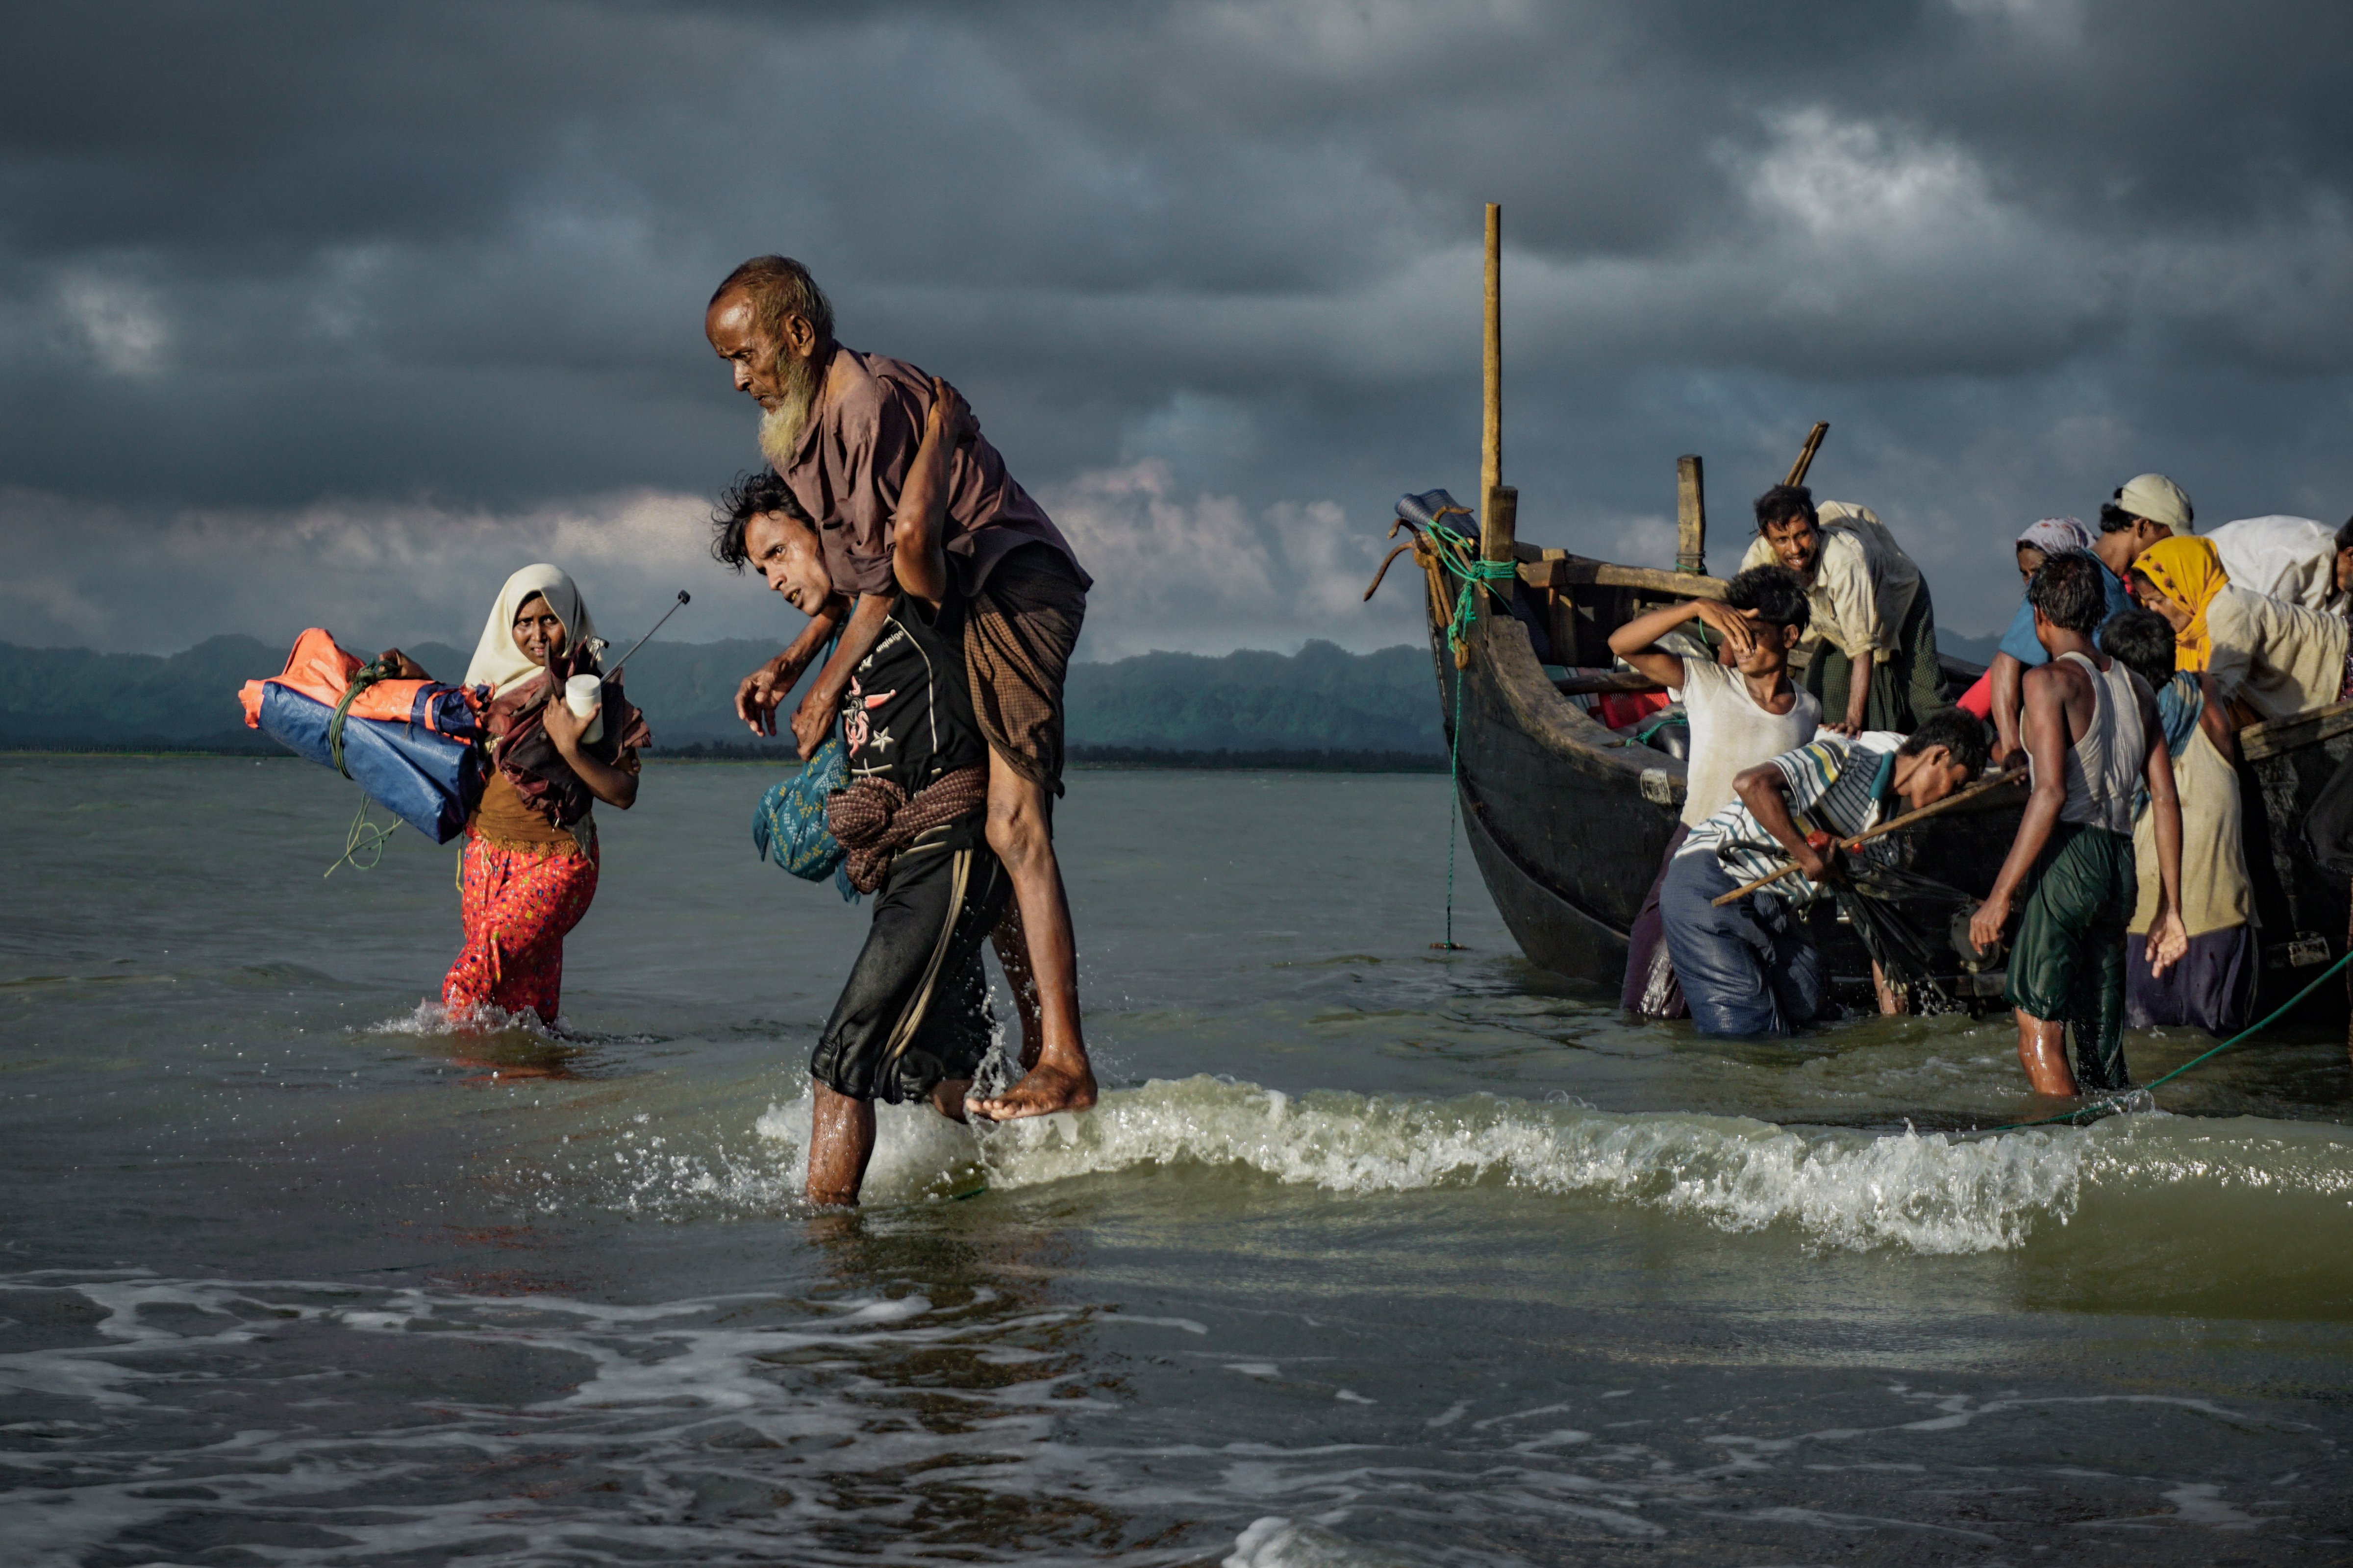 Rohingya Muslim refugees disembark from a boat on the Bangladeshi side of Naf river in Teknaf on Sept. 13, 2017. (NurPhoto/Getty Images)